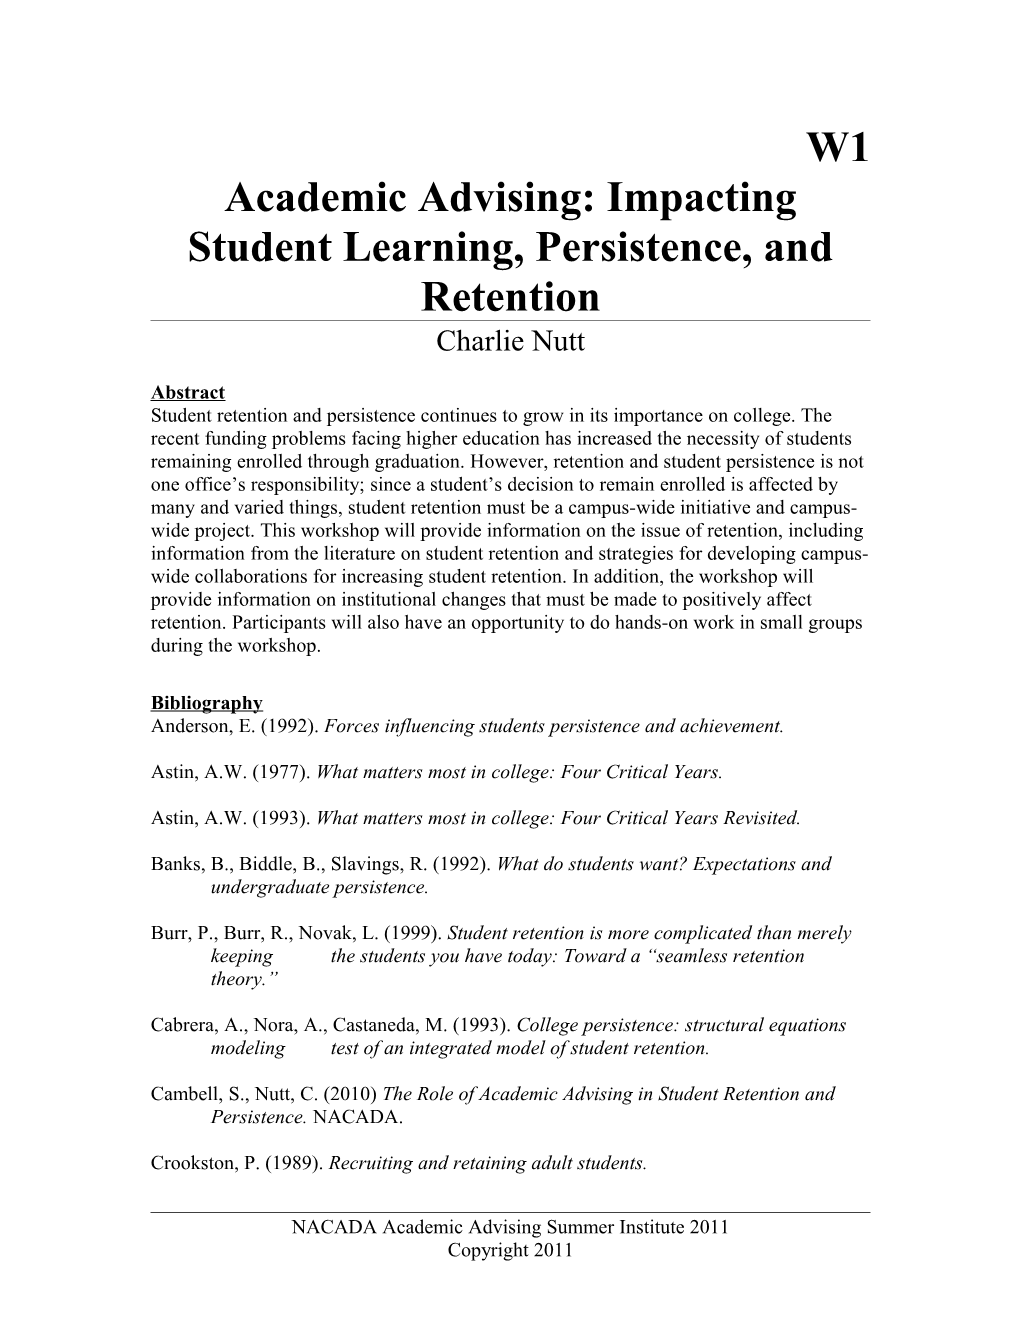 Academic Advising: Impacting Student Learning, Persistence, and Retention